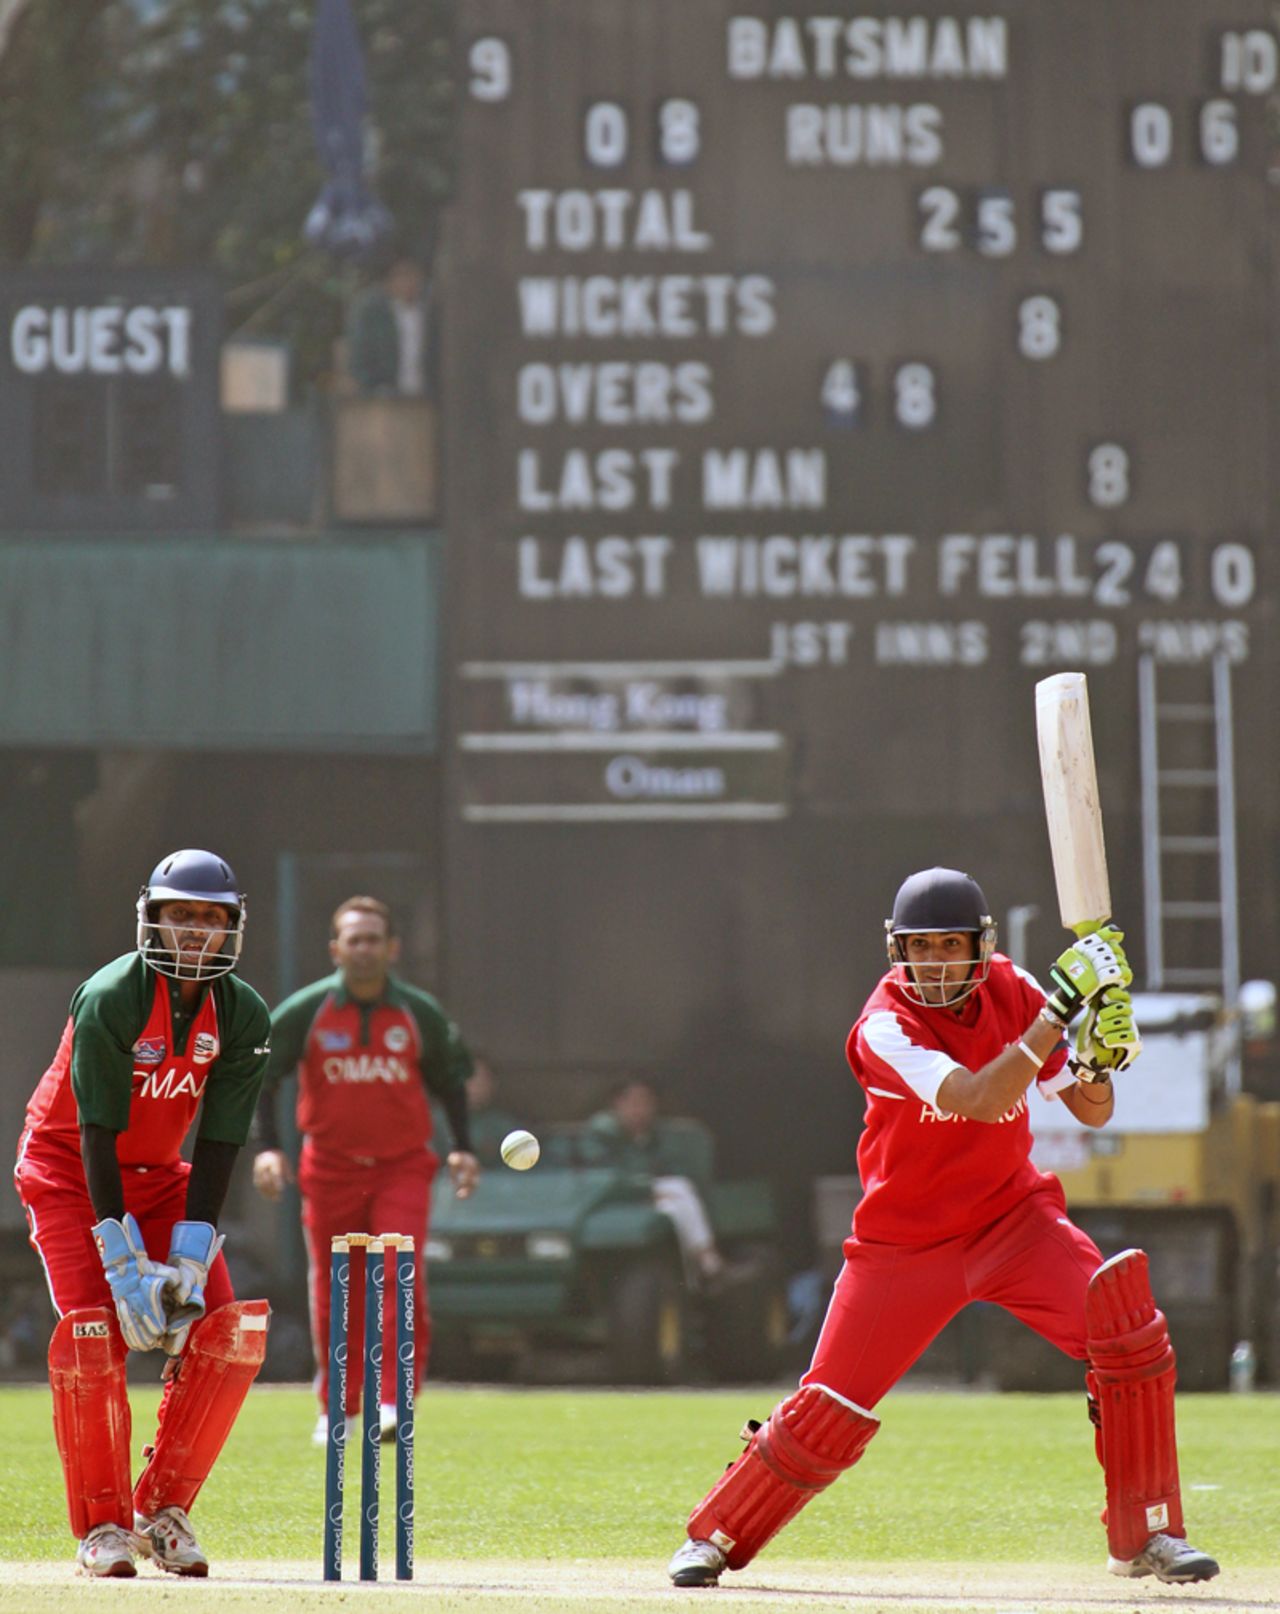 Waqas Barkat pushes the ball towards the off side during his innings against Oman in an ICC WCL Division 3 match played at Kowloon Cricket Club on 23rd January 2011